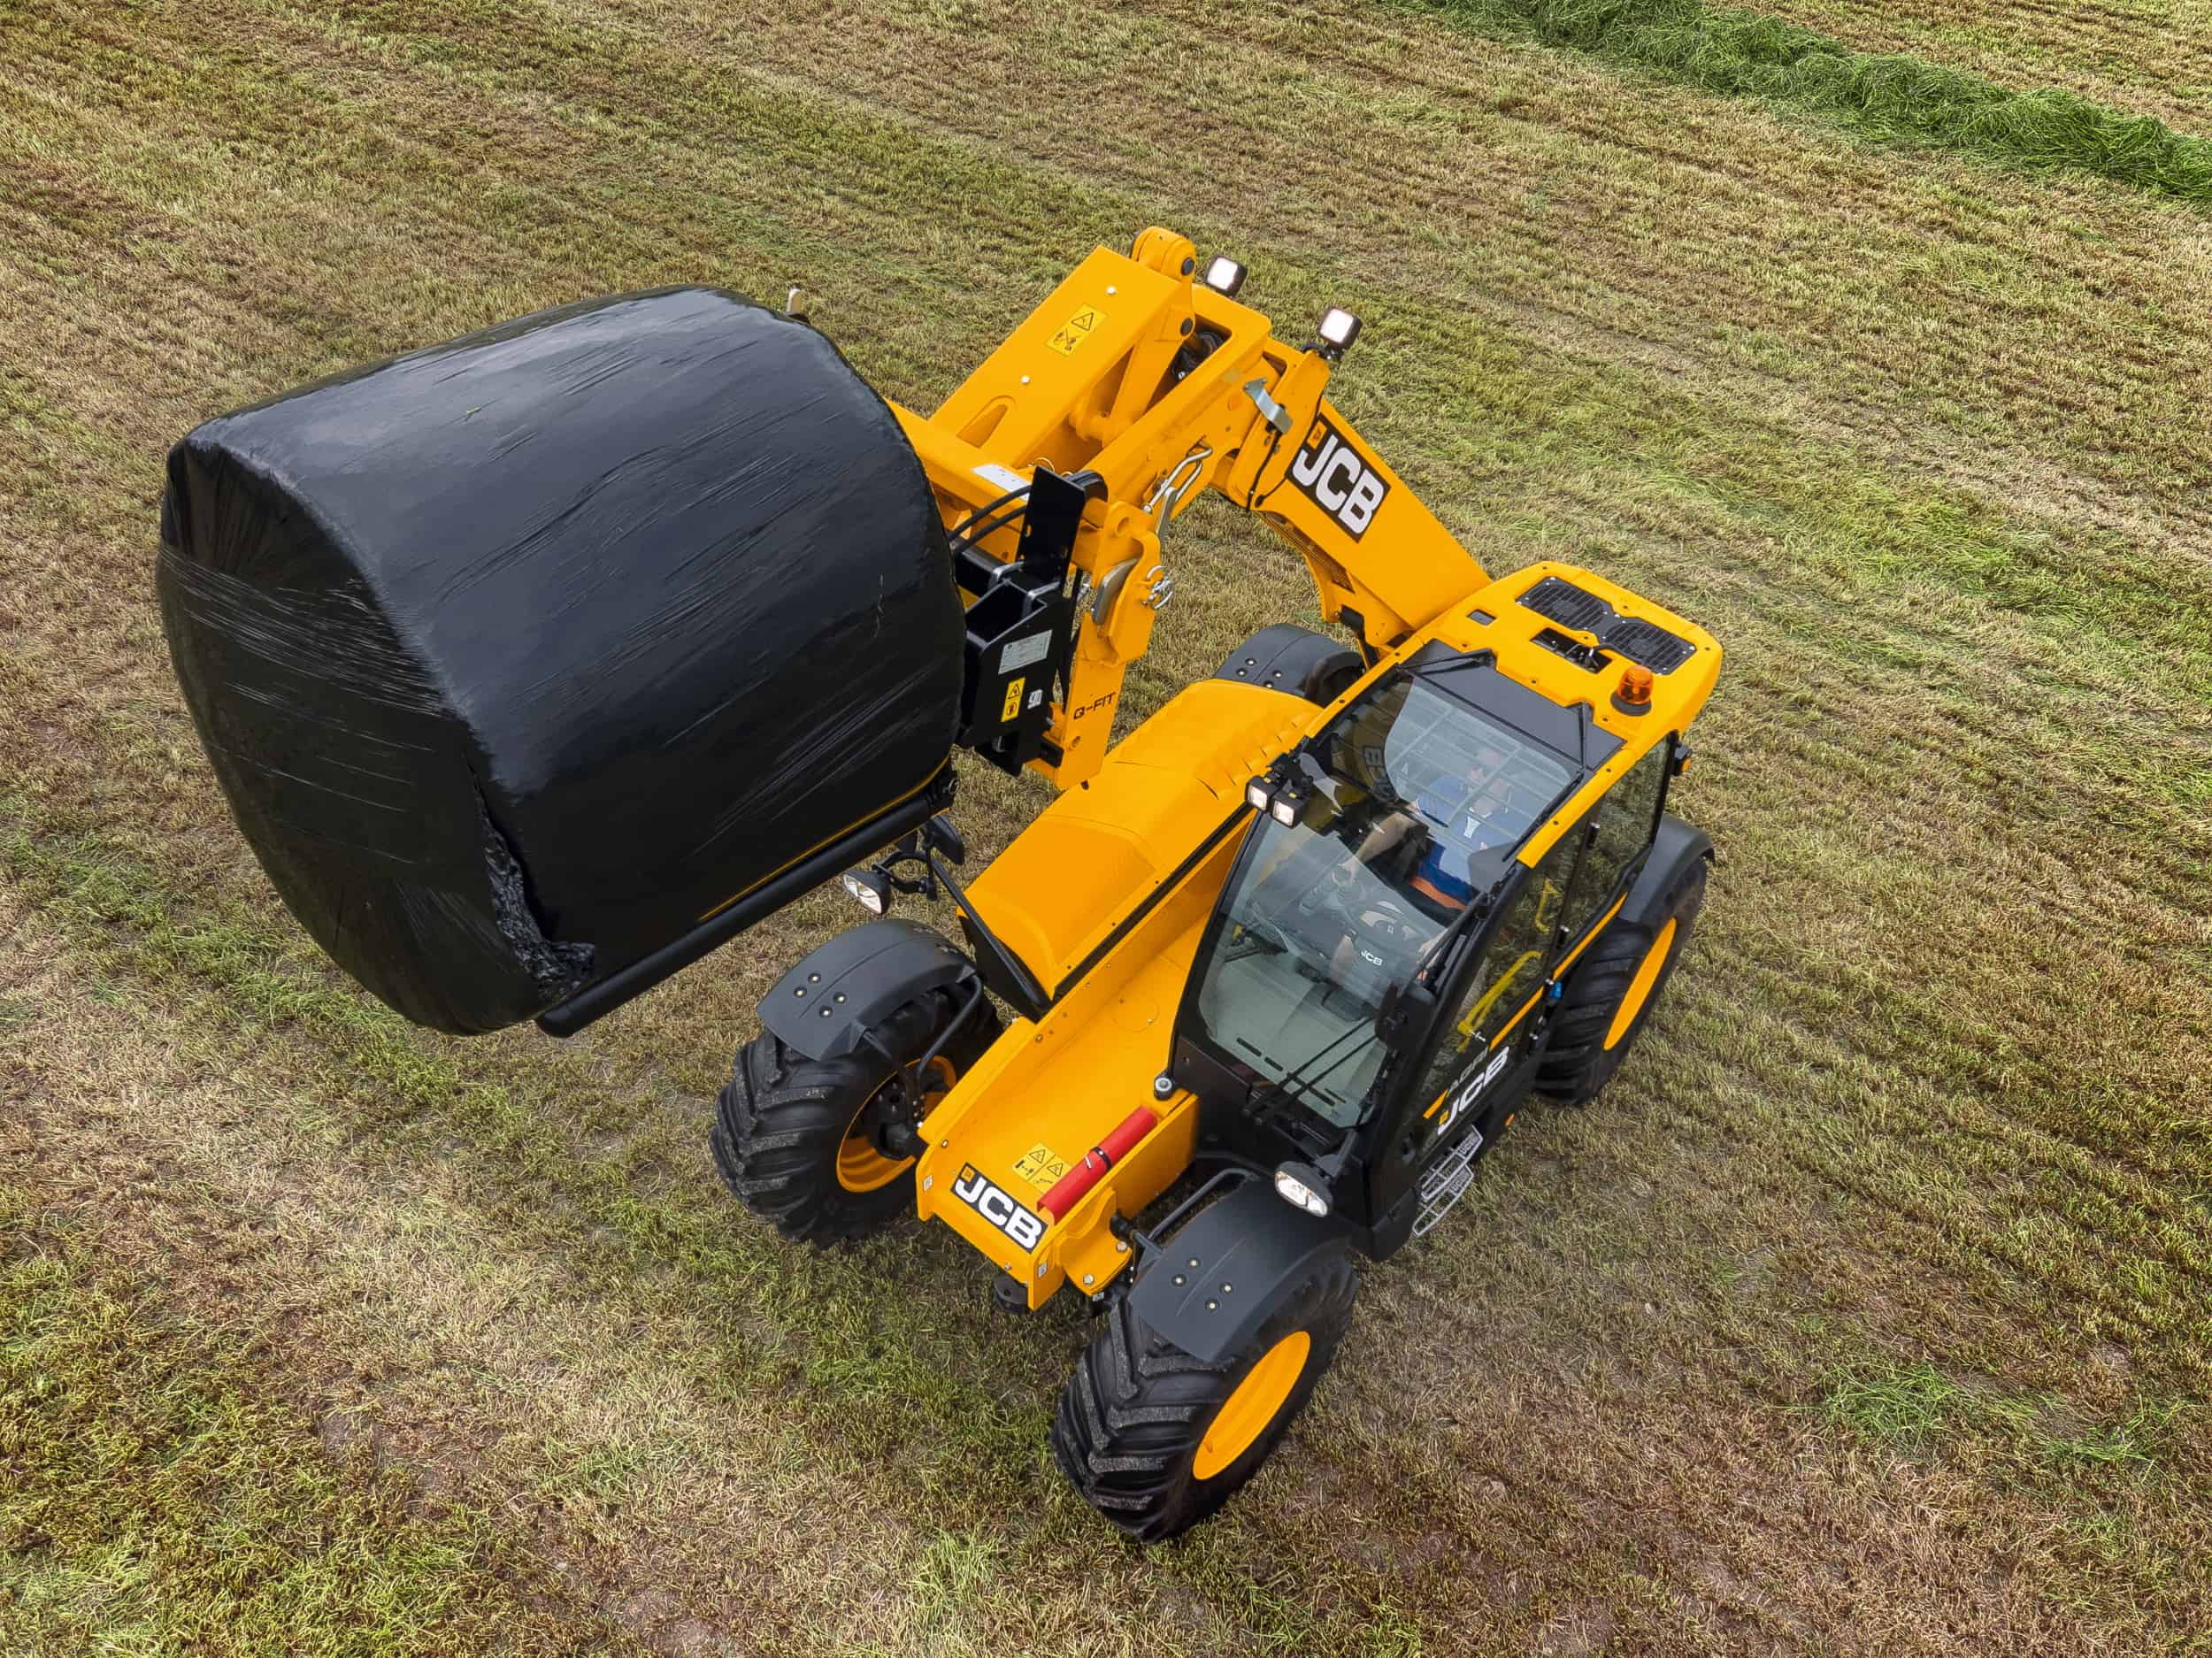 JCB to unveil new loaders, telehandlers and tractors